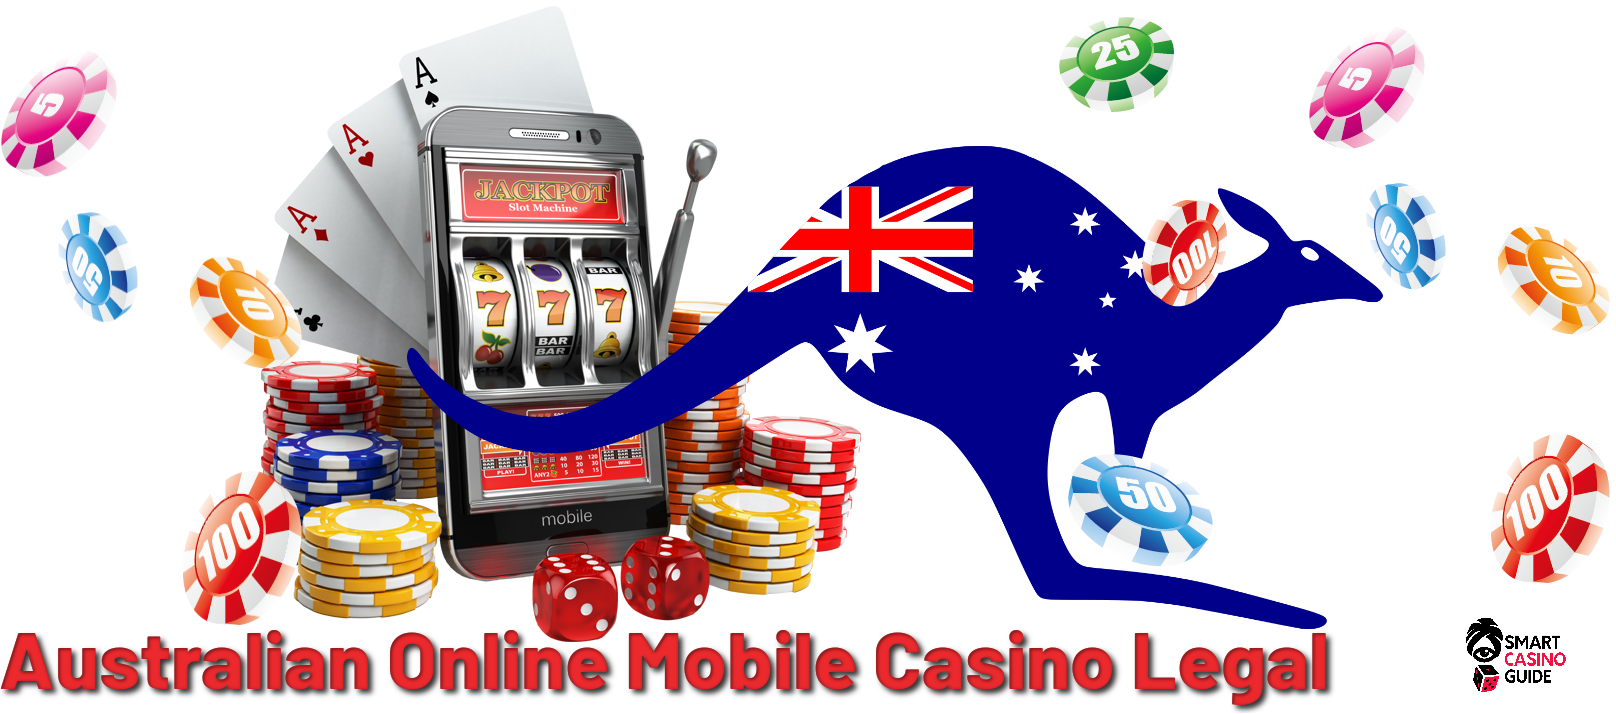 How To Find The Right Casino For Your Specific Product